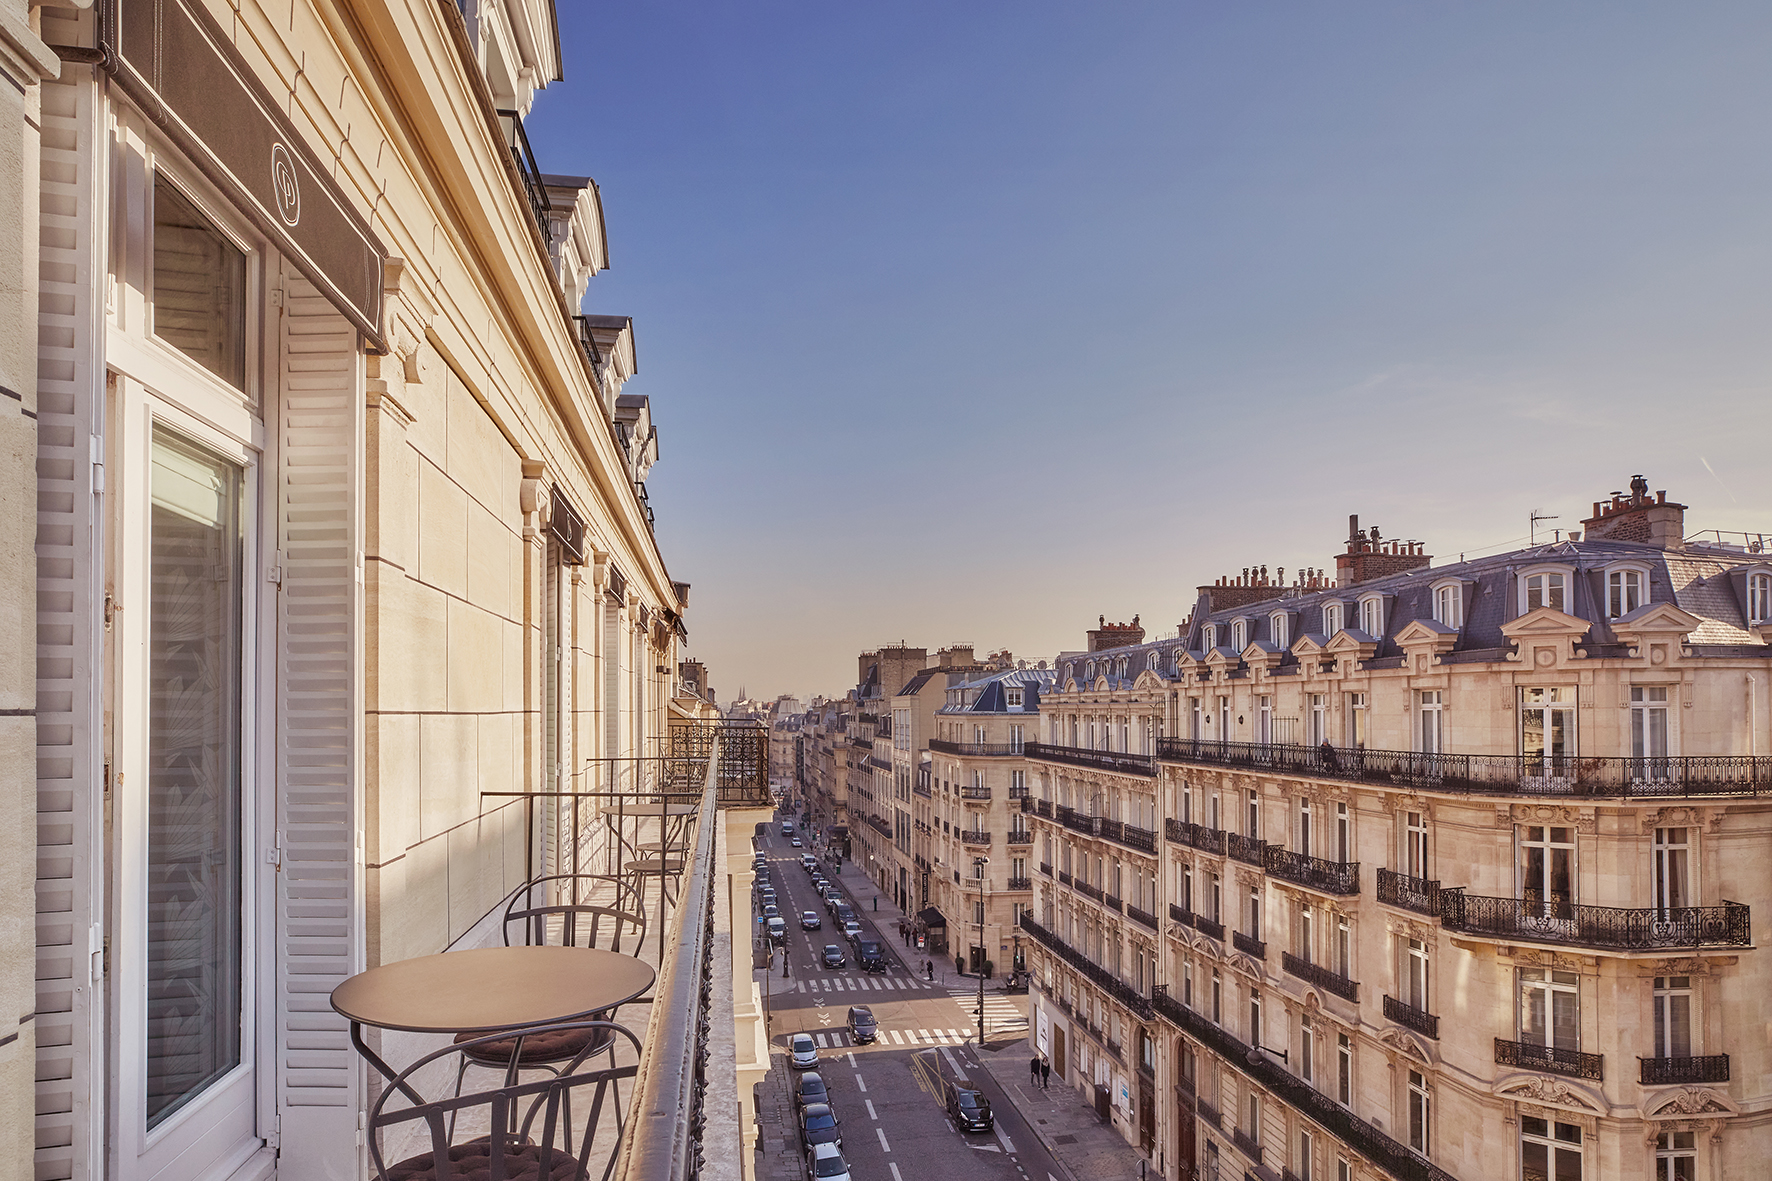 We are excited to welcome Hotel Grand Powers and Grand Hotel du Palais Royal!